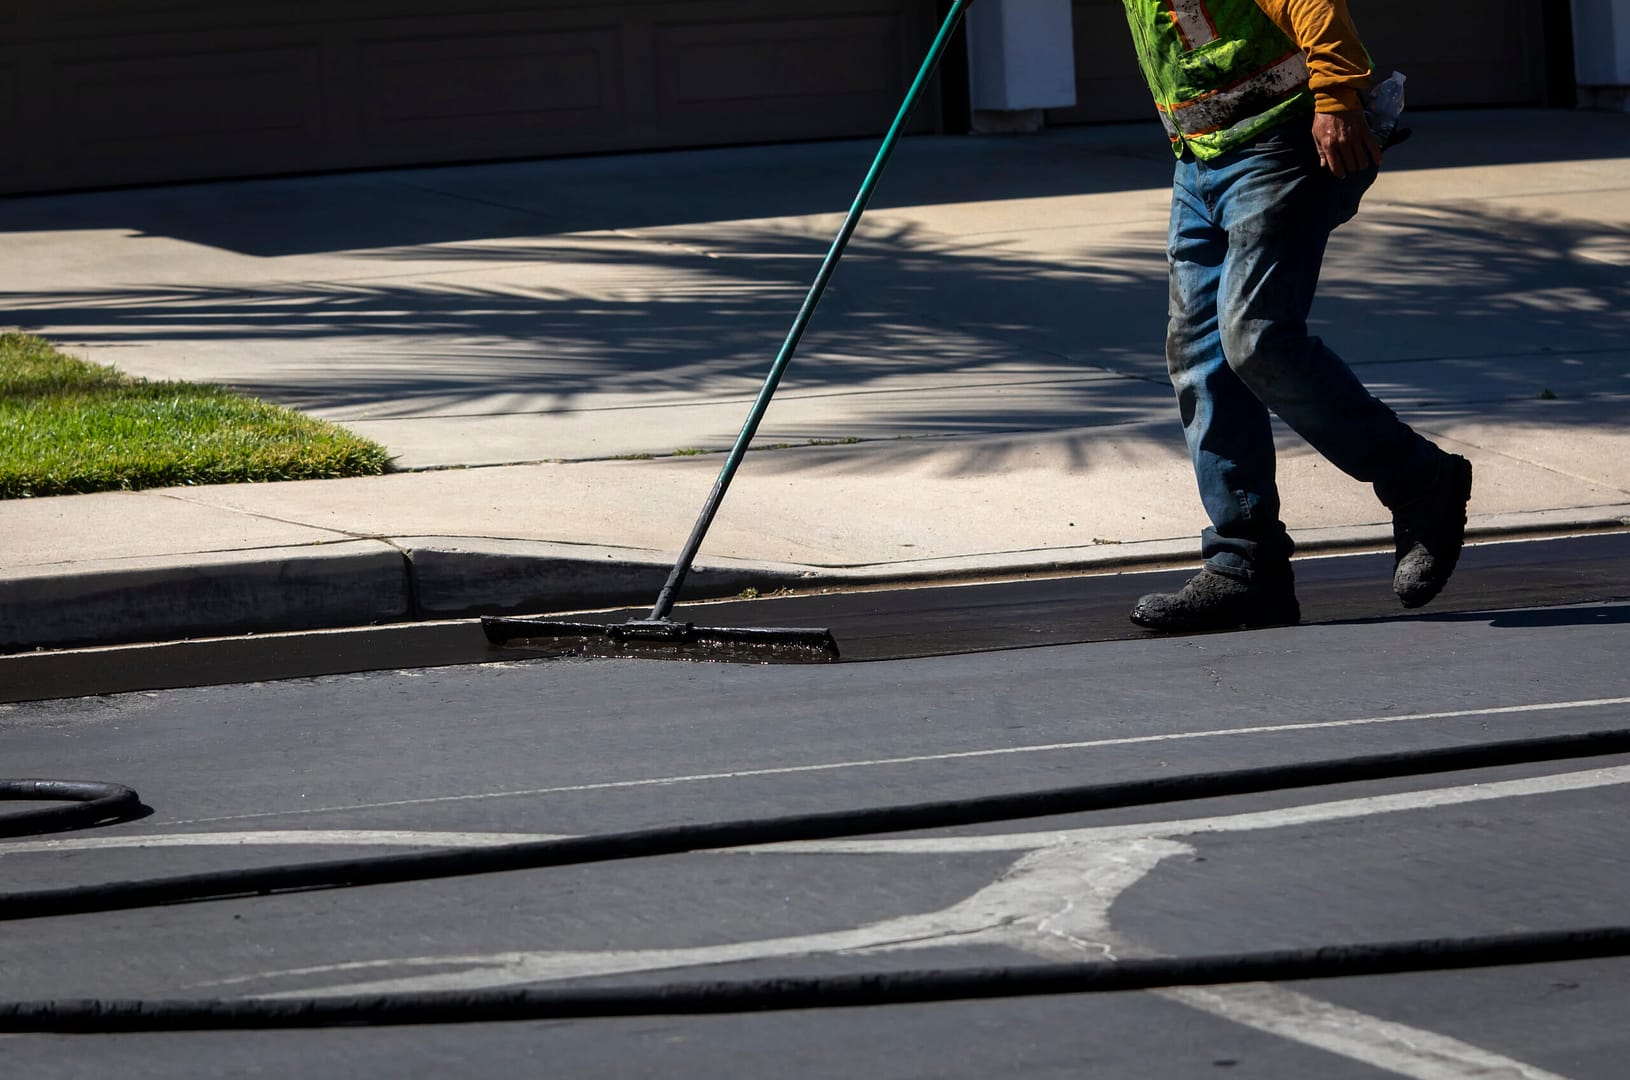 A worker expertly applies sealcoating to asphalt during a resurfacing project using a specialized brush, ensuring a smooth and protective finish.